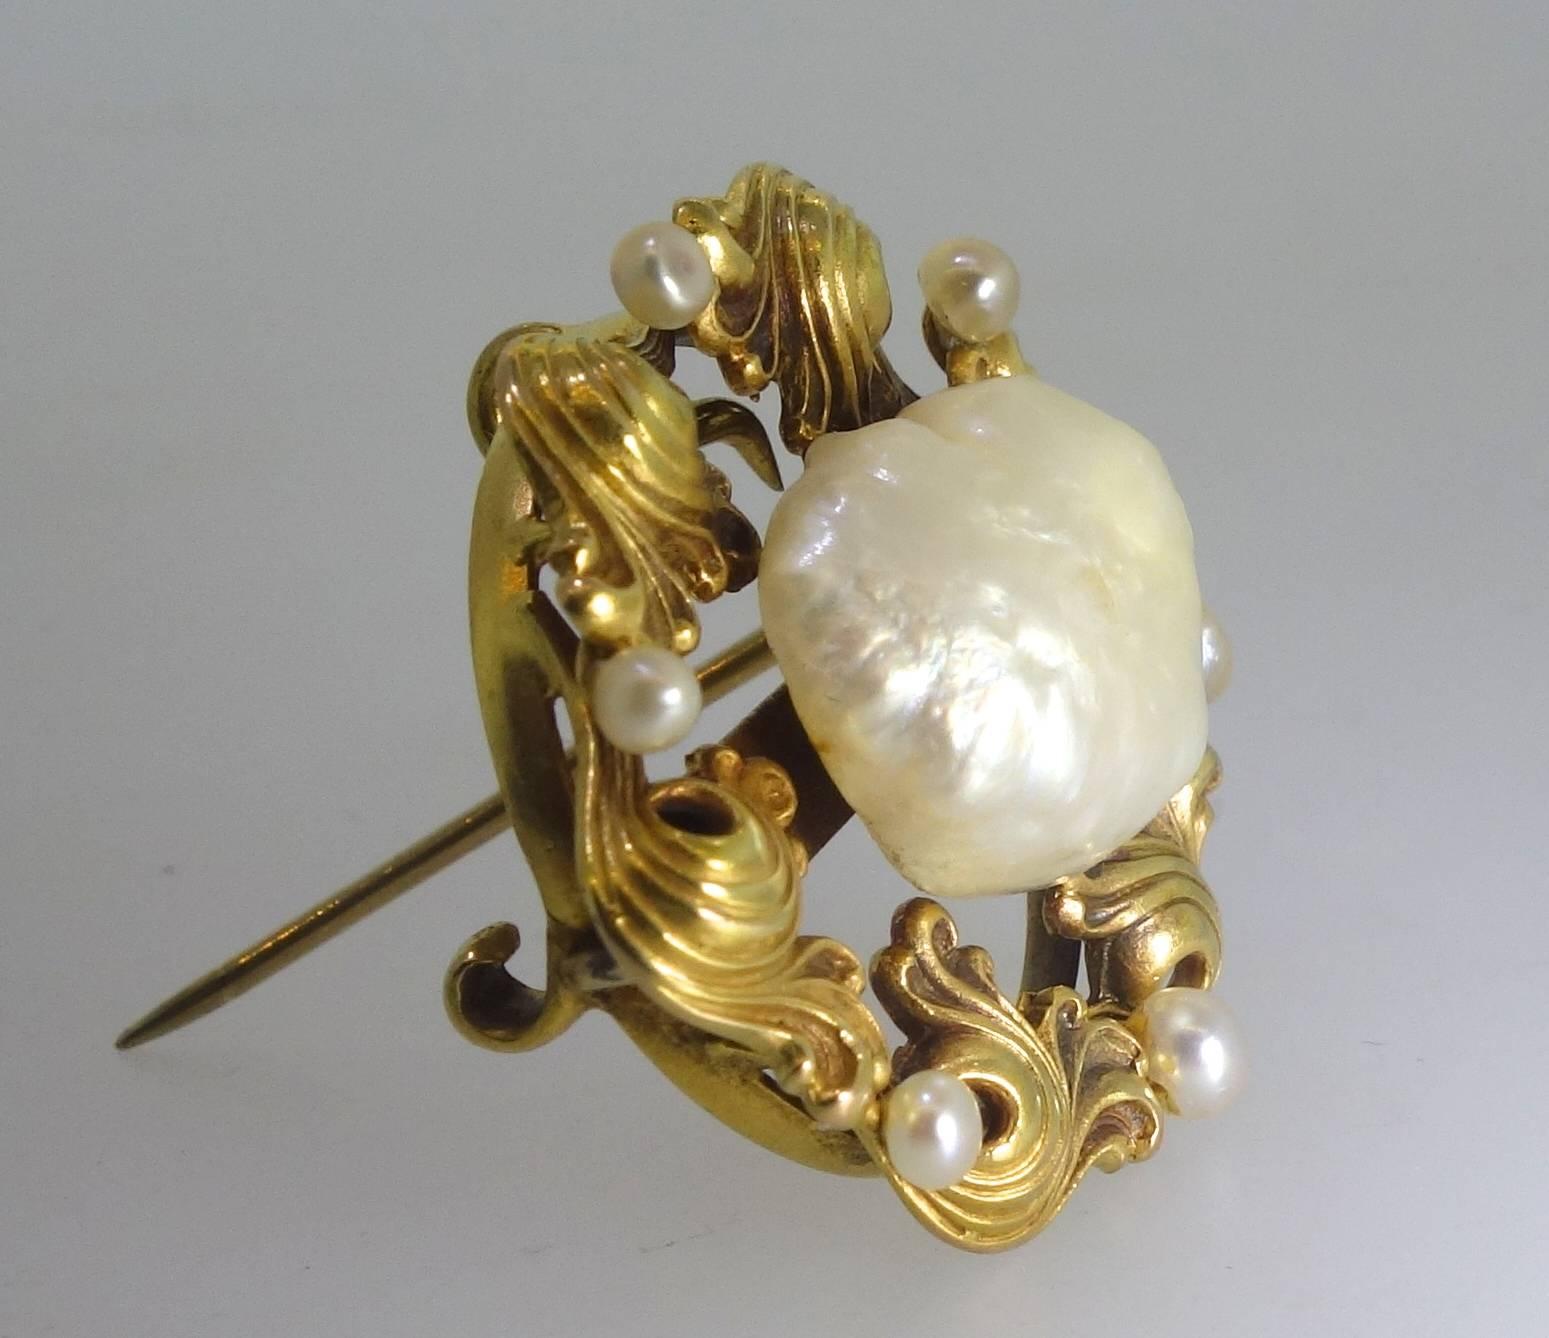 Made at the turn of the century and centering a large natural freshwater pearl surrounded by small natural peals, this piece is 14K and a wonderful example of early workmanship and pearls which are very difficult to fine today because of pollution. 